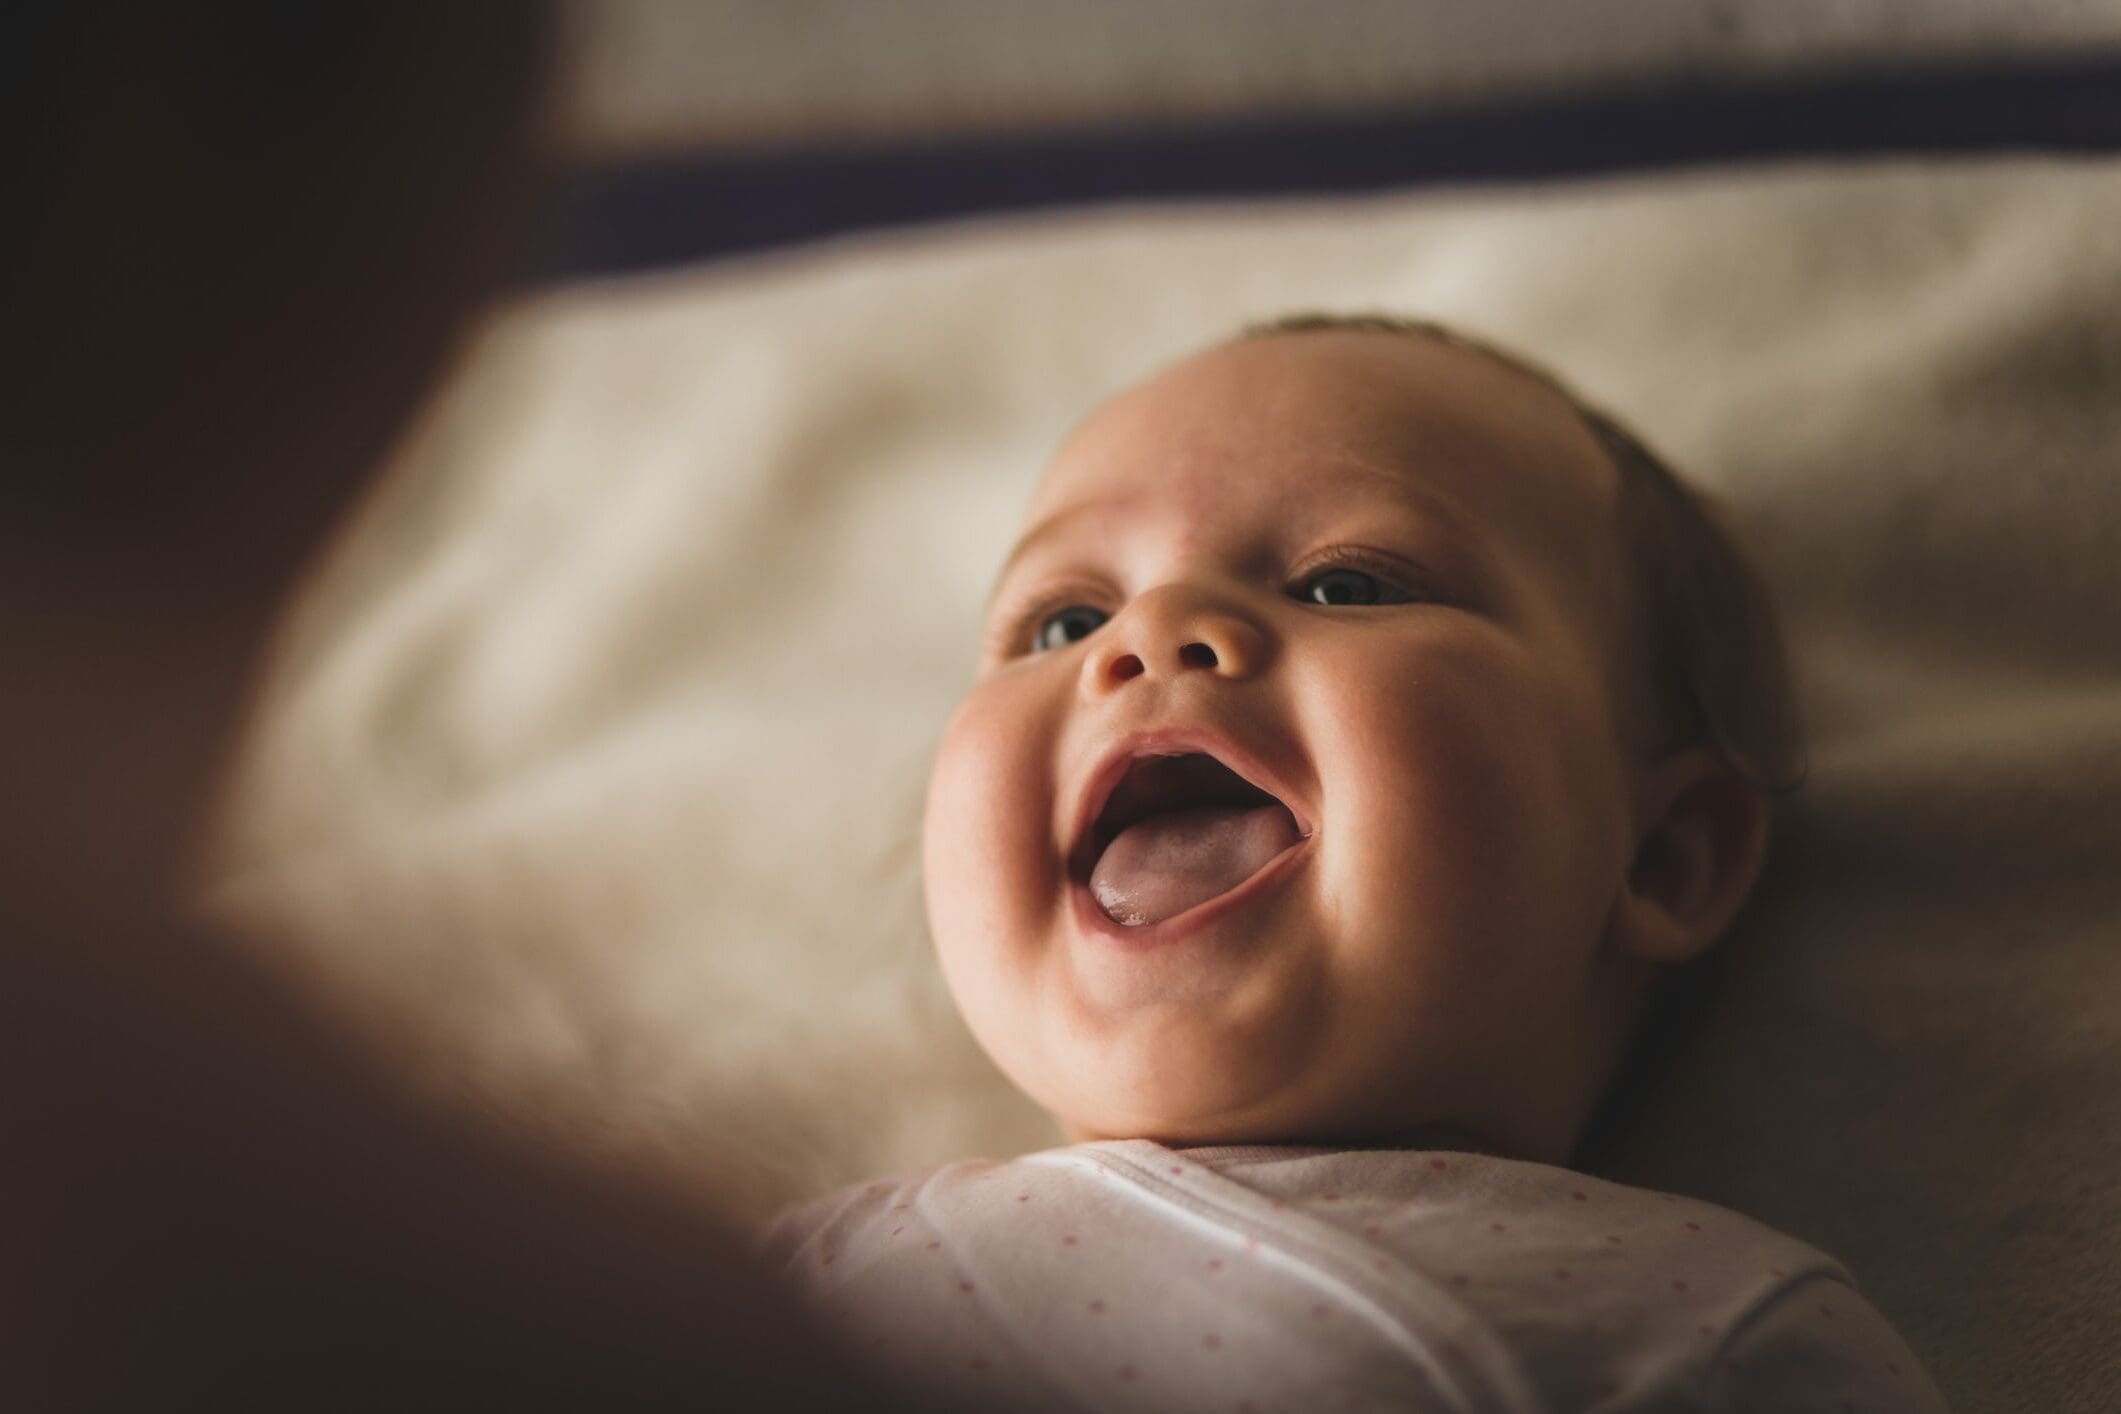 newborn baby girl laughing and giggling while with her mother considers protecting her with child life insurance